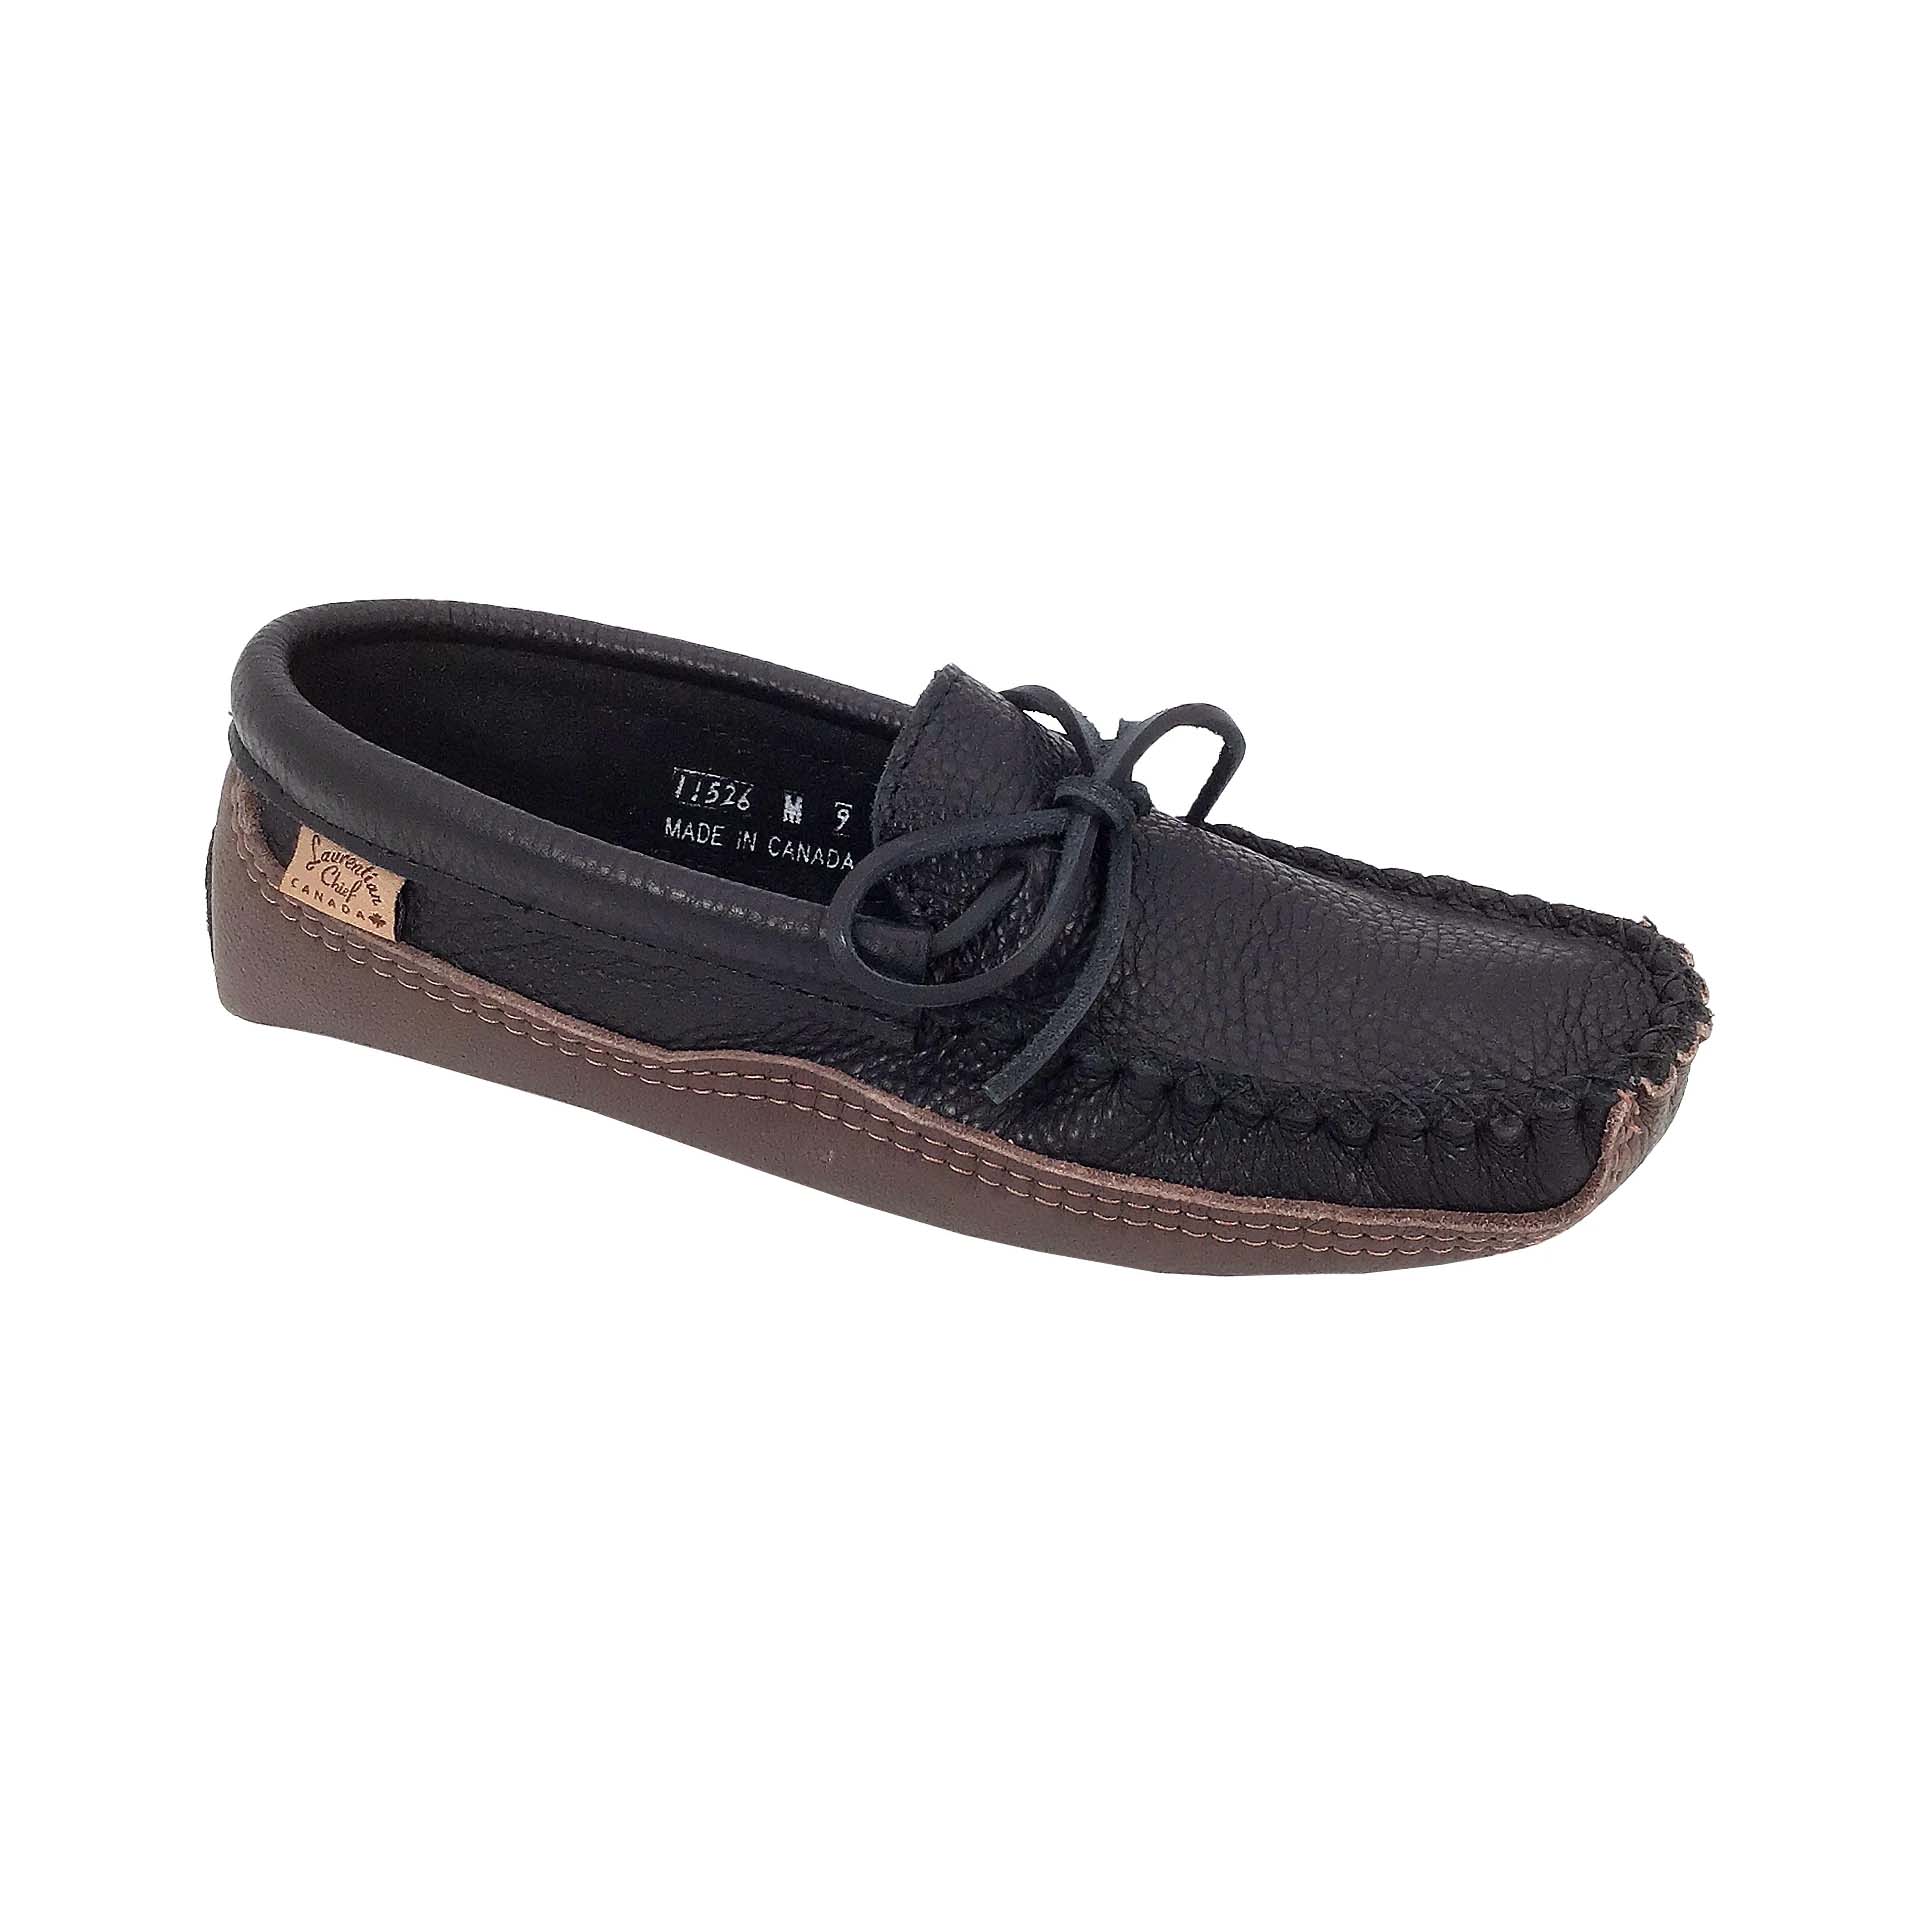 Men's Earthing Moccasins Black Leather (Final Clearance 14 ONLY)